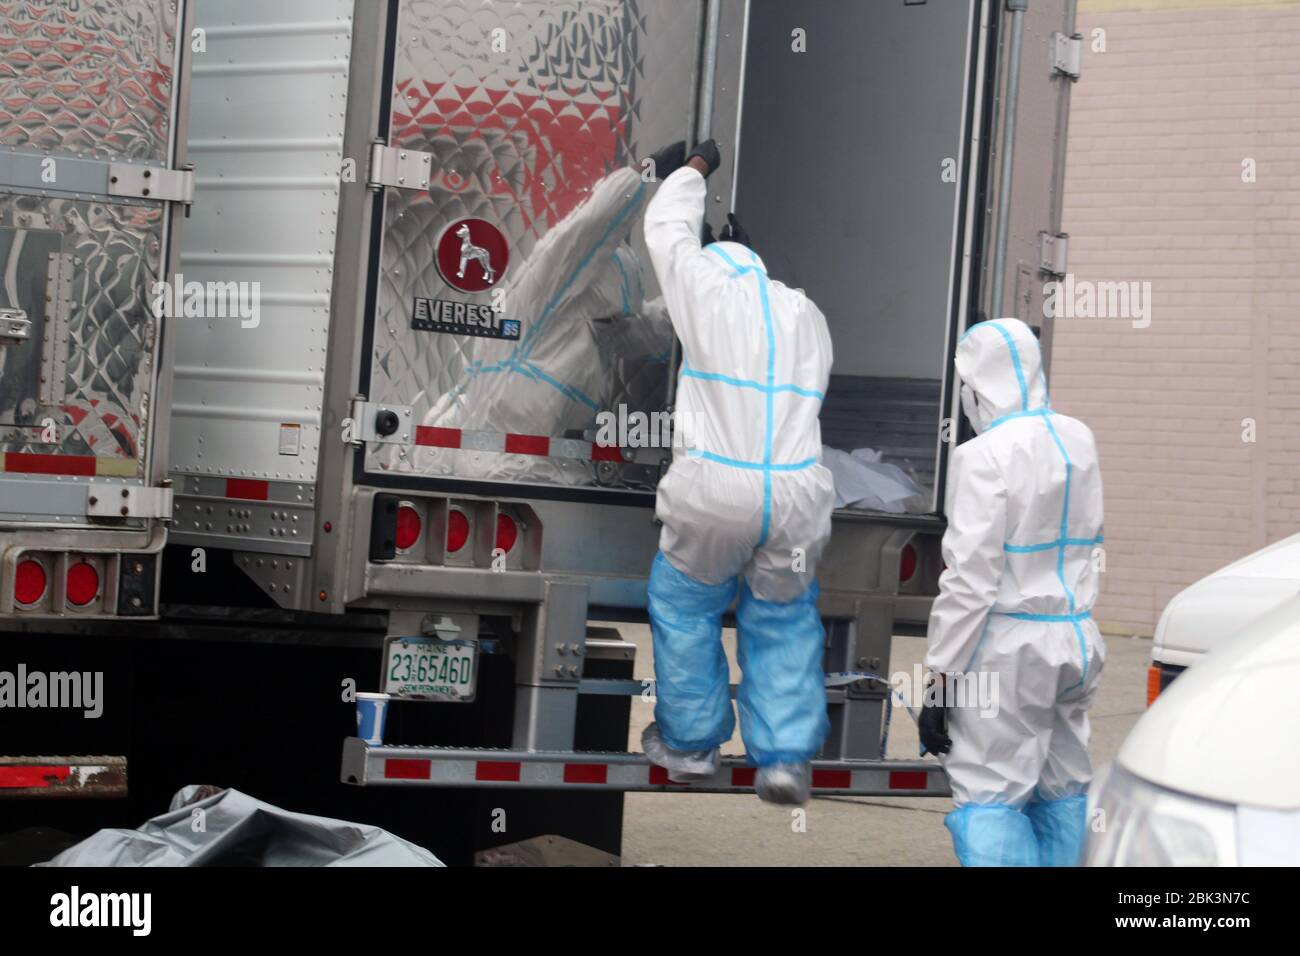 New York, New York, USA. 30th Apr, 2020. One of these 2 workers, dressed in a hazmat, gets off one of the big refrigerated trucks where bodies have been disposed next to the Andrew T. Cleckley Funeral Home in Brooklyn whose corpses not properly cared have been removed. 60 bodies were stored in 4 non-refregerated vehiciles lining the street nearby stores. Neighbors reported a foul smell still persistent and fluids dripping from the trucks. The funeral home was overwhelmed by COVID-19 deaths, waiting for weeks for cremations in New York. Credit: Marie Le Ble/ZUMA Wire/Alamy Live News Stock Photo